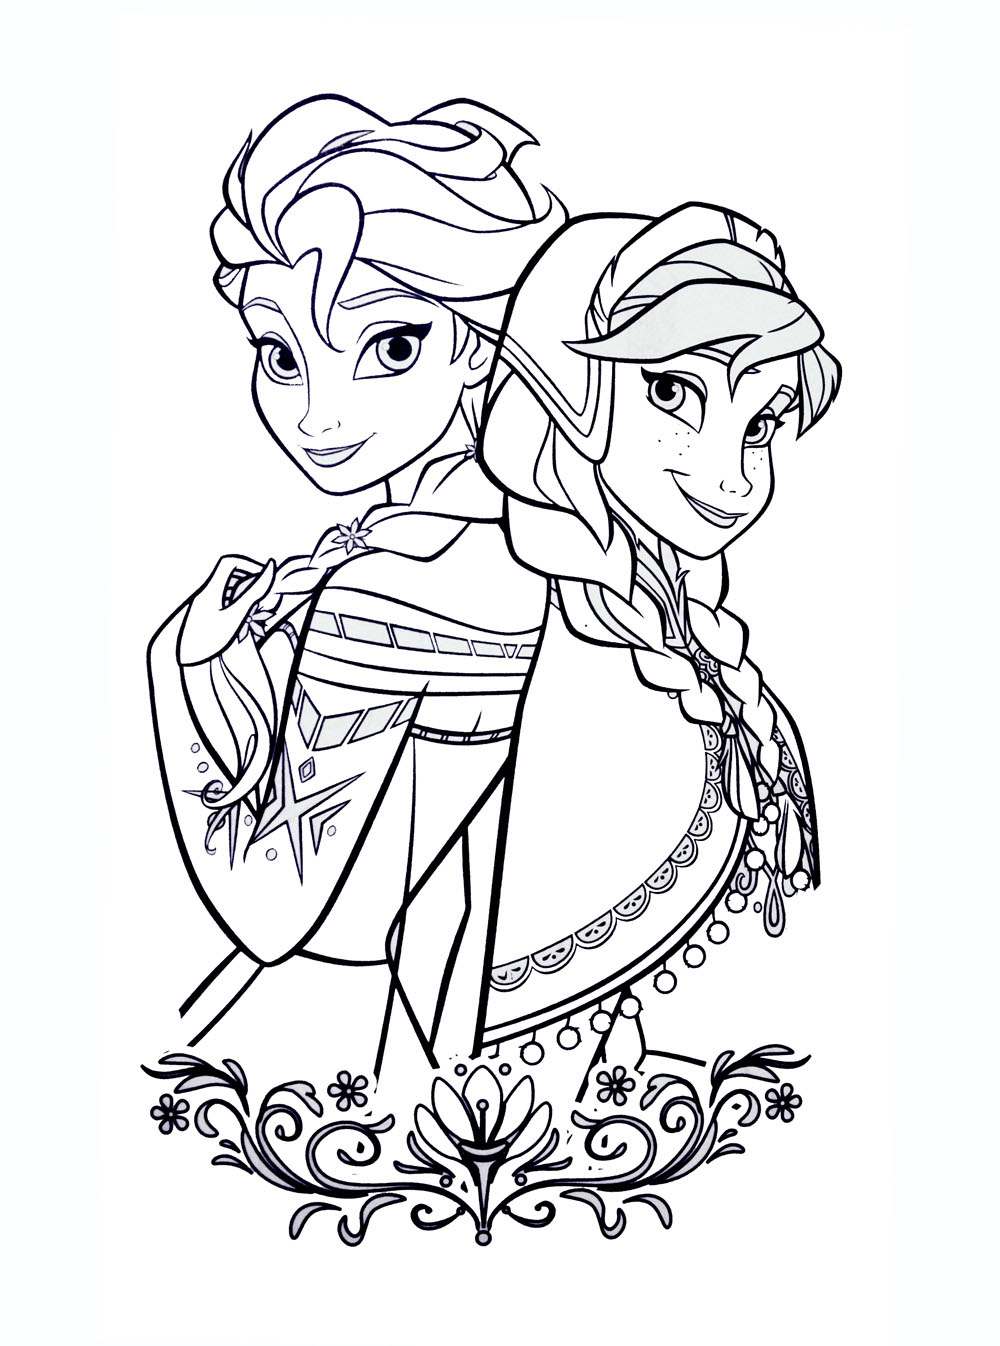 Frozen free to color for kids - Frozen Kids Coloring Pages